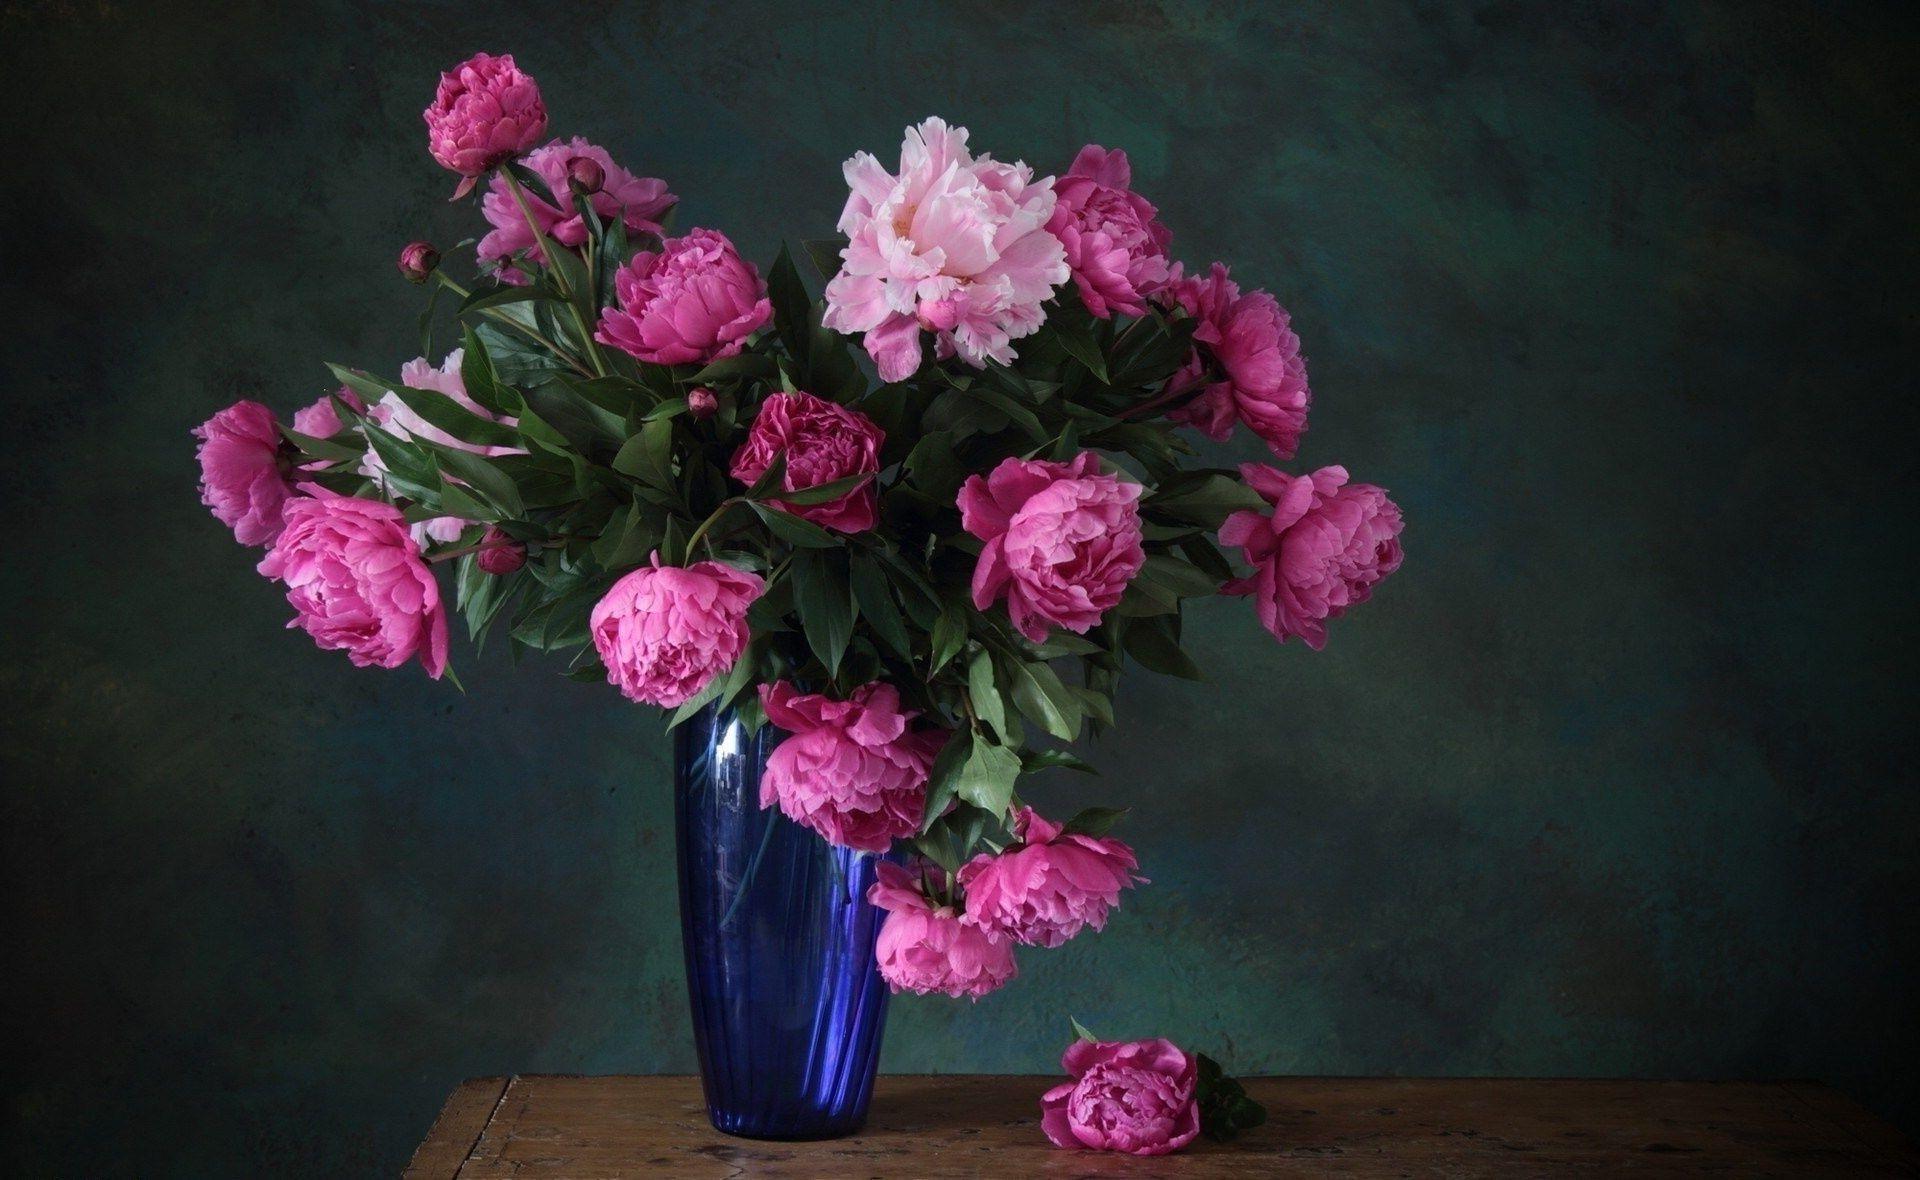 A bouquet of blue Flowers vase of pink peonies. Android wallpaper